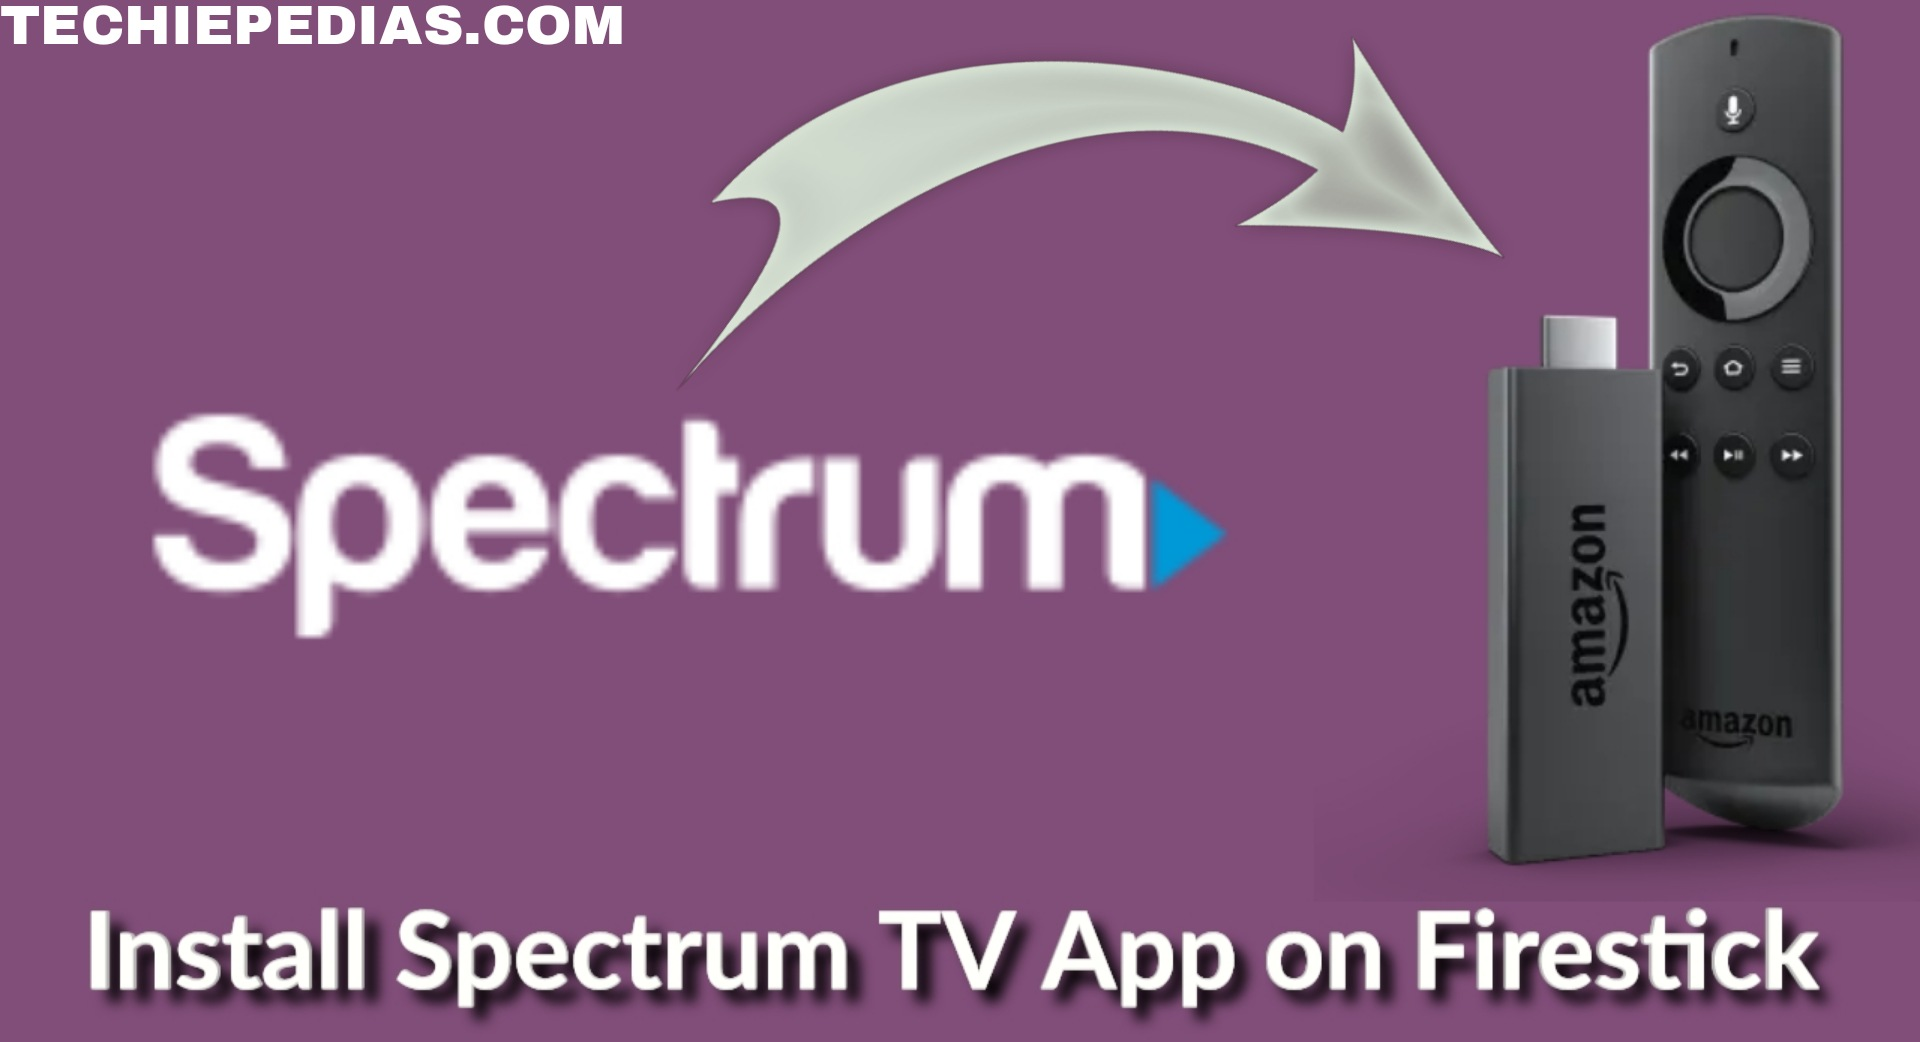 How to Install Spectrum TV App on Firestick Full Guide Step-by-Step